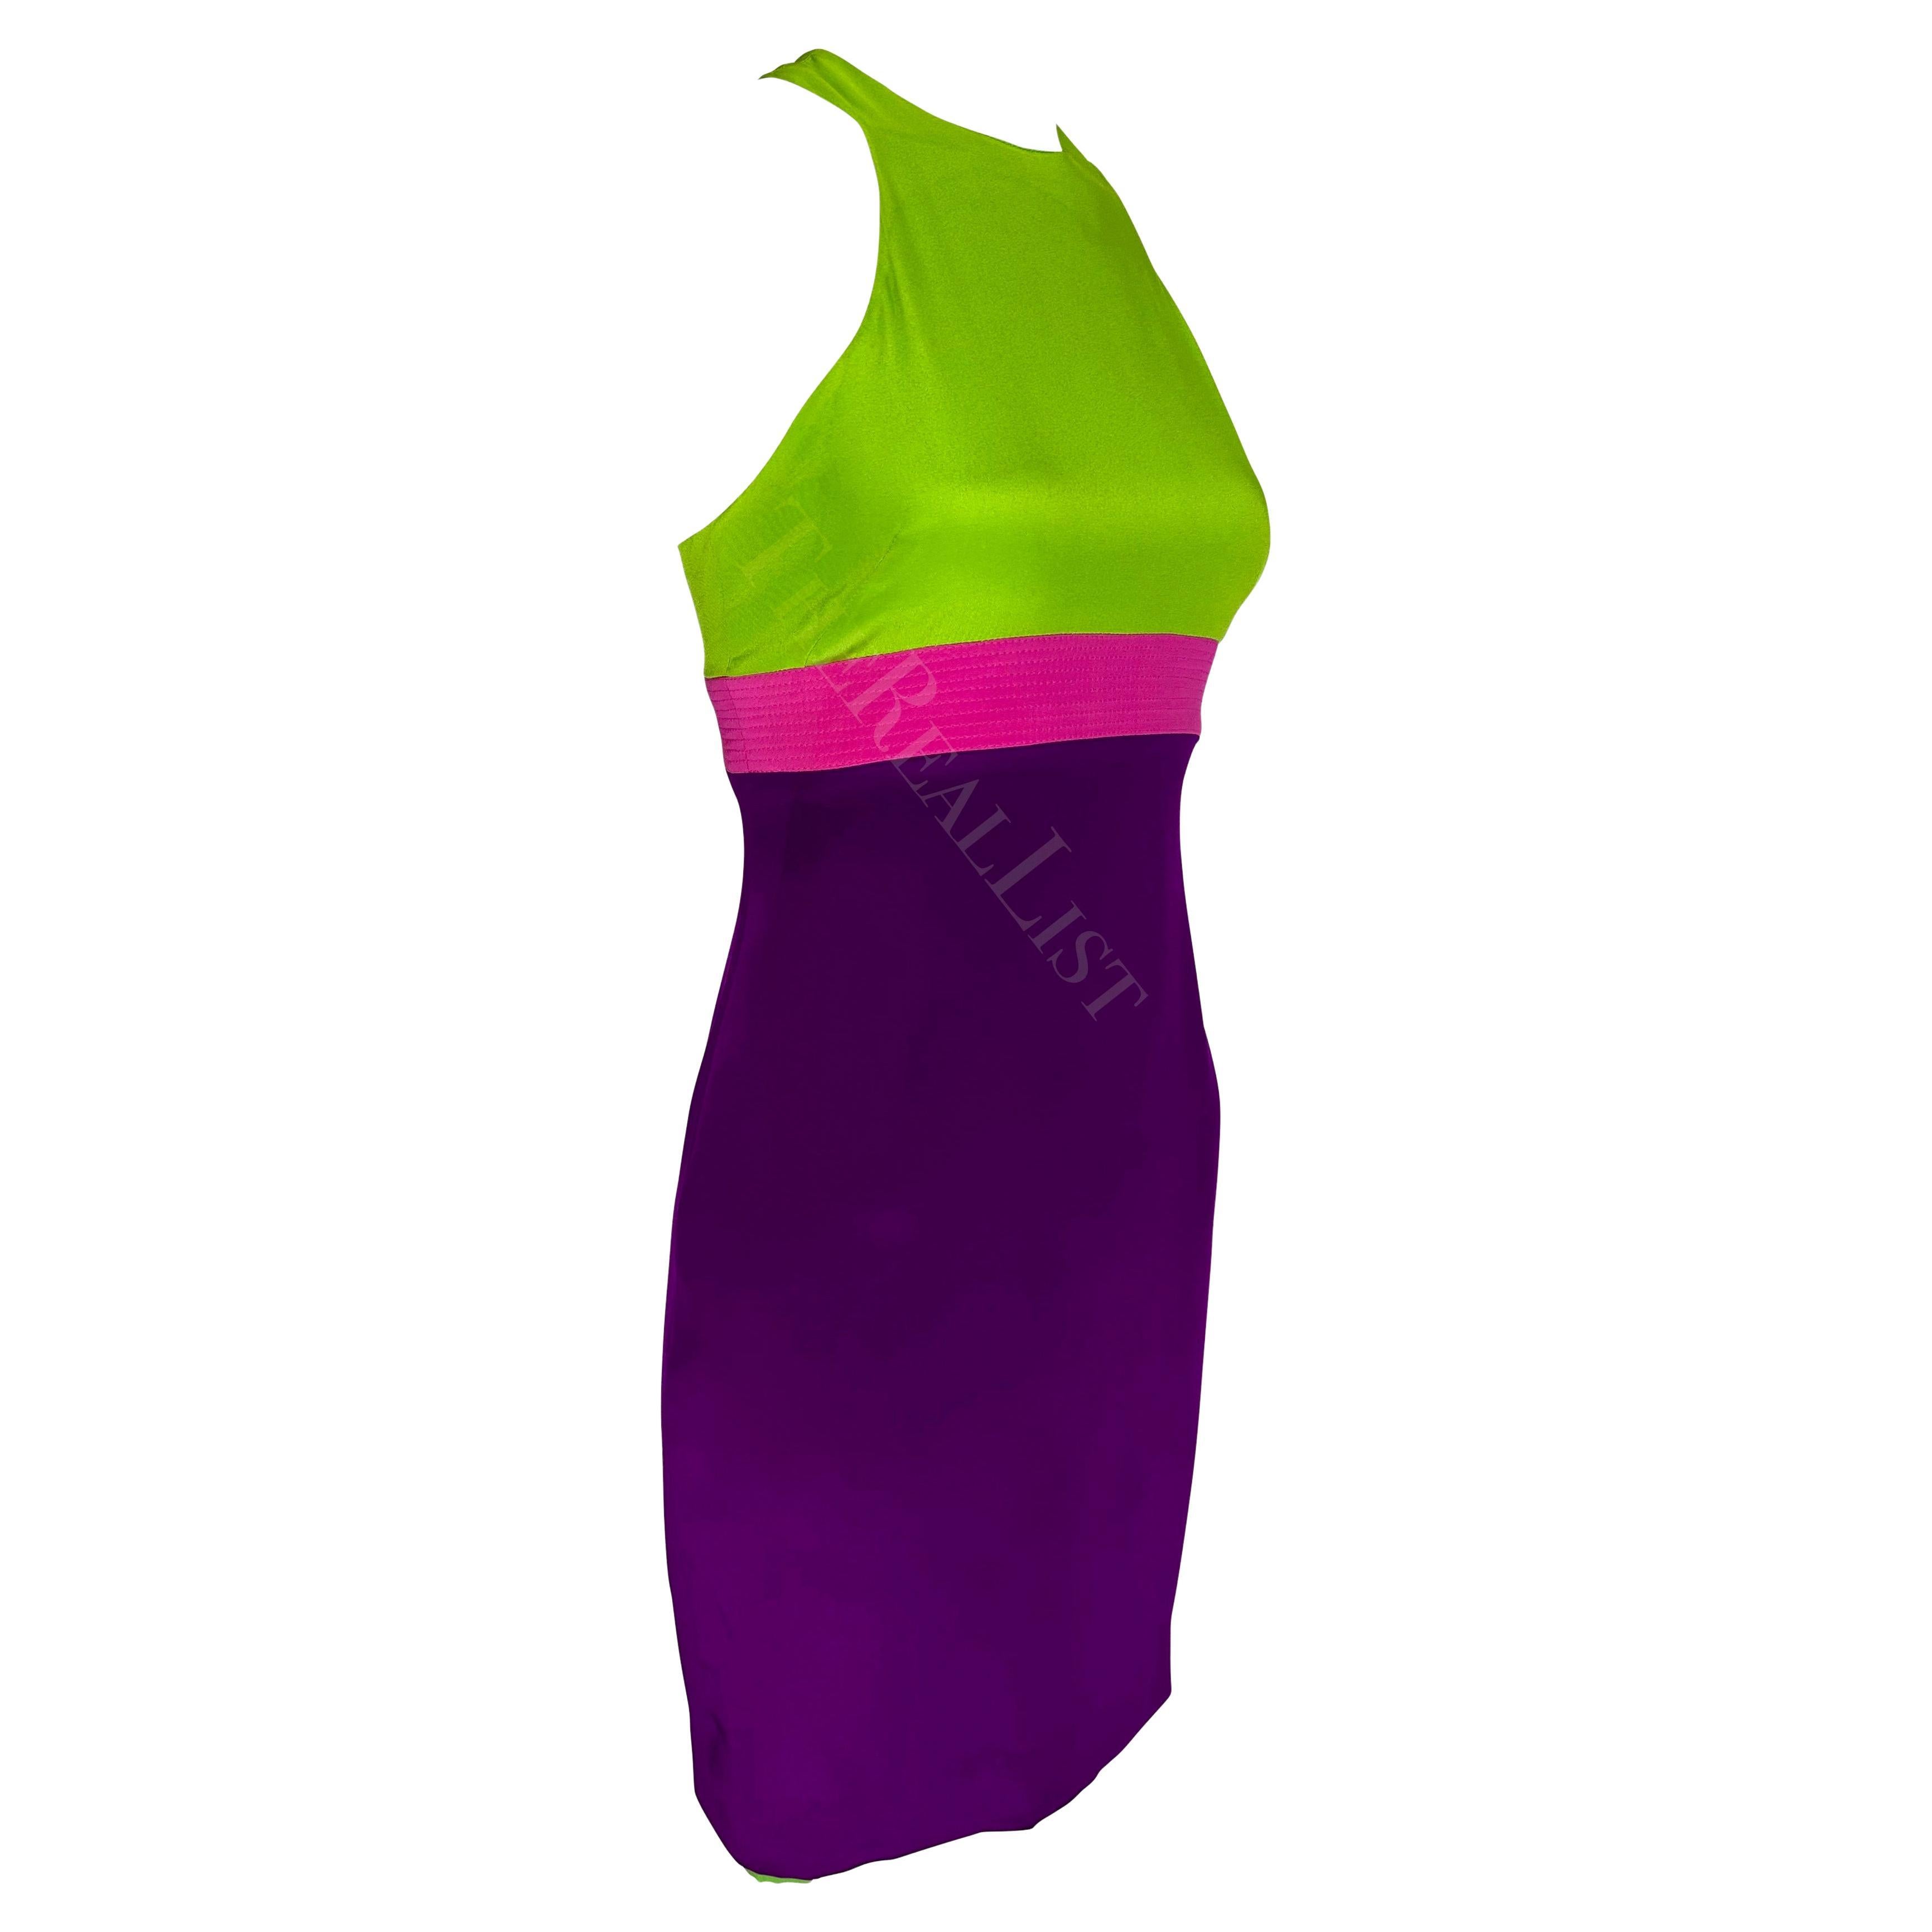 Presenting a purple and green Gianni Versace mini dress, designed by Donatella Versace. From the Spring/Summer 2003 collection, this hyper-girly color block dress features a green top, purple skirt, and hot pink band under the bust. From one of